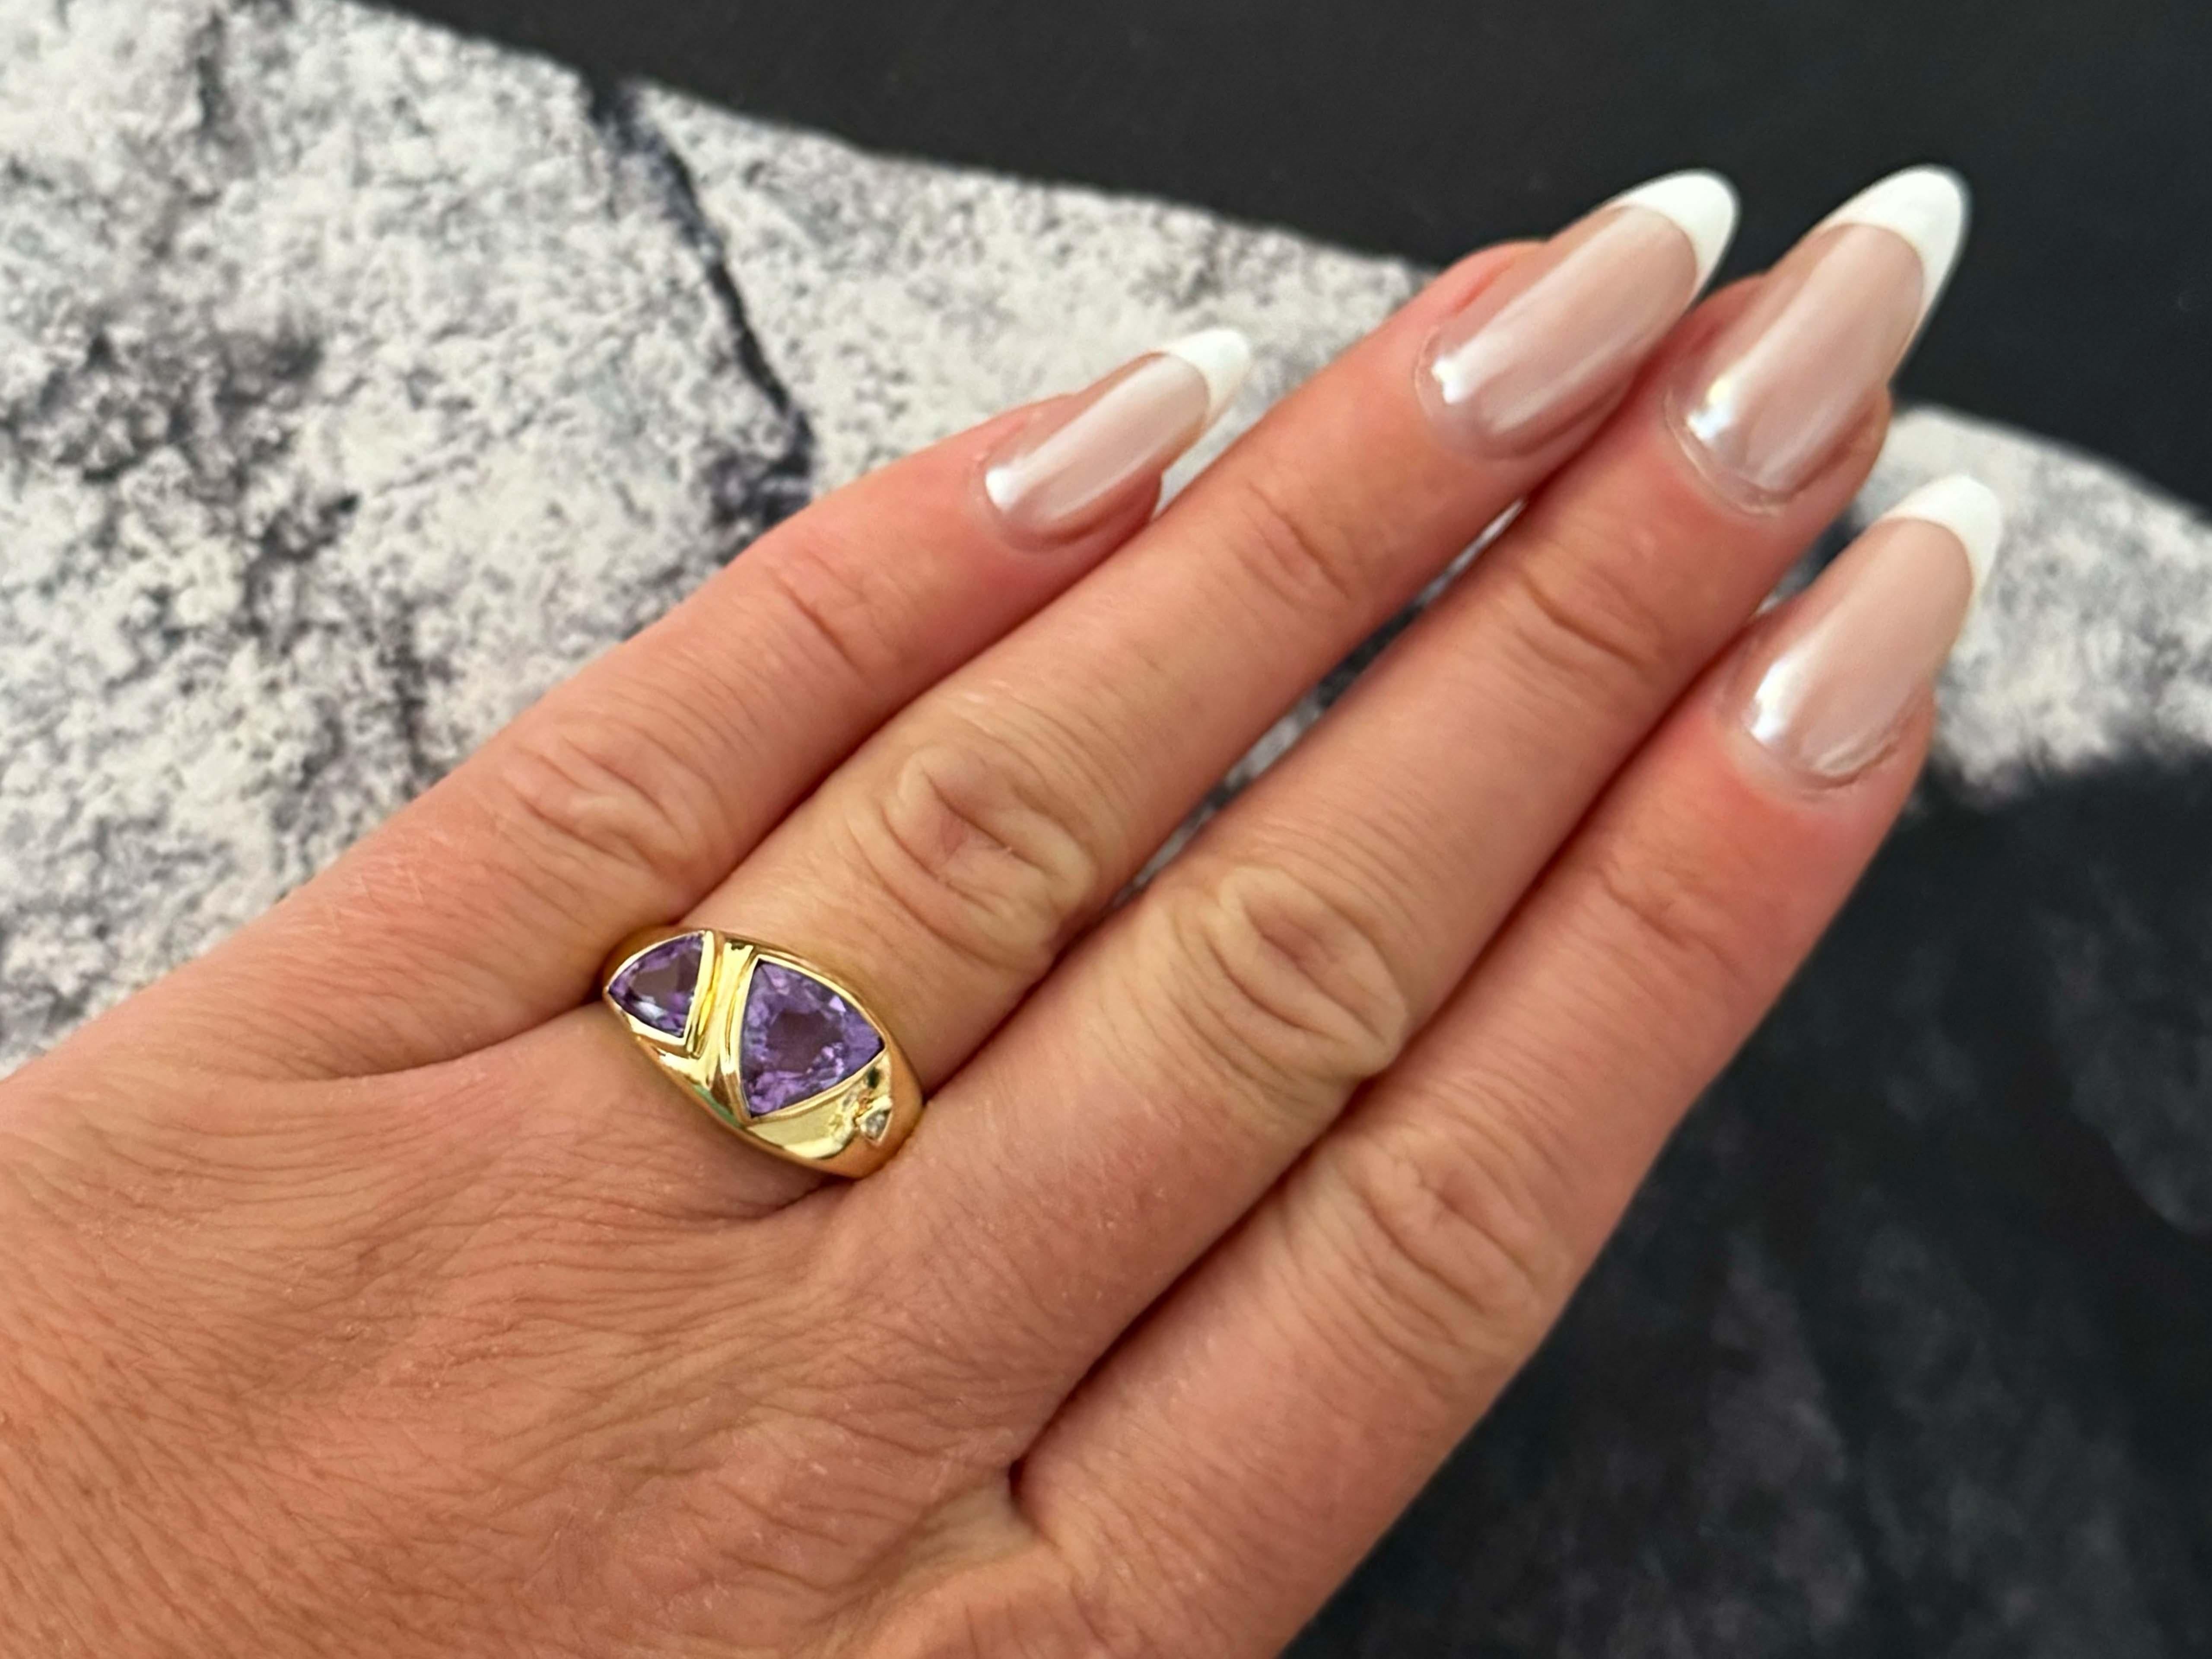 Ring Specifications:

Metal: 14k Yellow Gold

Total Weight: 4.1 Grams
​
​Diamond Count: 1
​
​Diamond Clarity: I1
​
​Diamond Color: I

Gemstone: 2 trillion cut amethyst 
​
​Amethyst Carat Weight: ~3.90 carats

Ring Size: 6.75 (resizable)

Stamped: